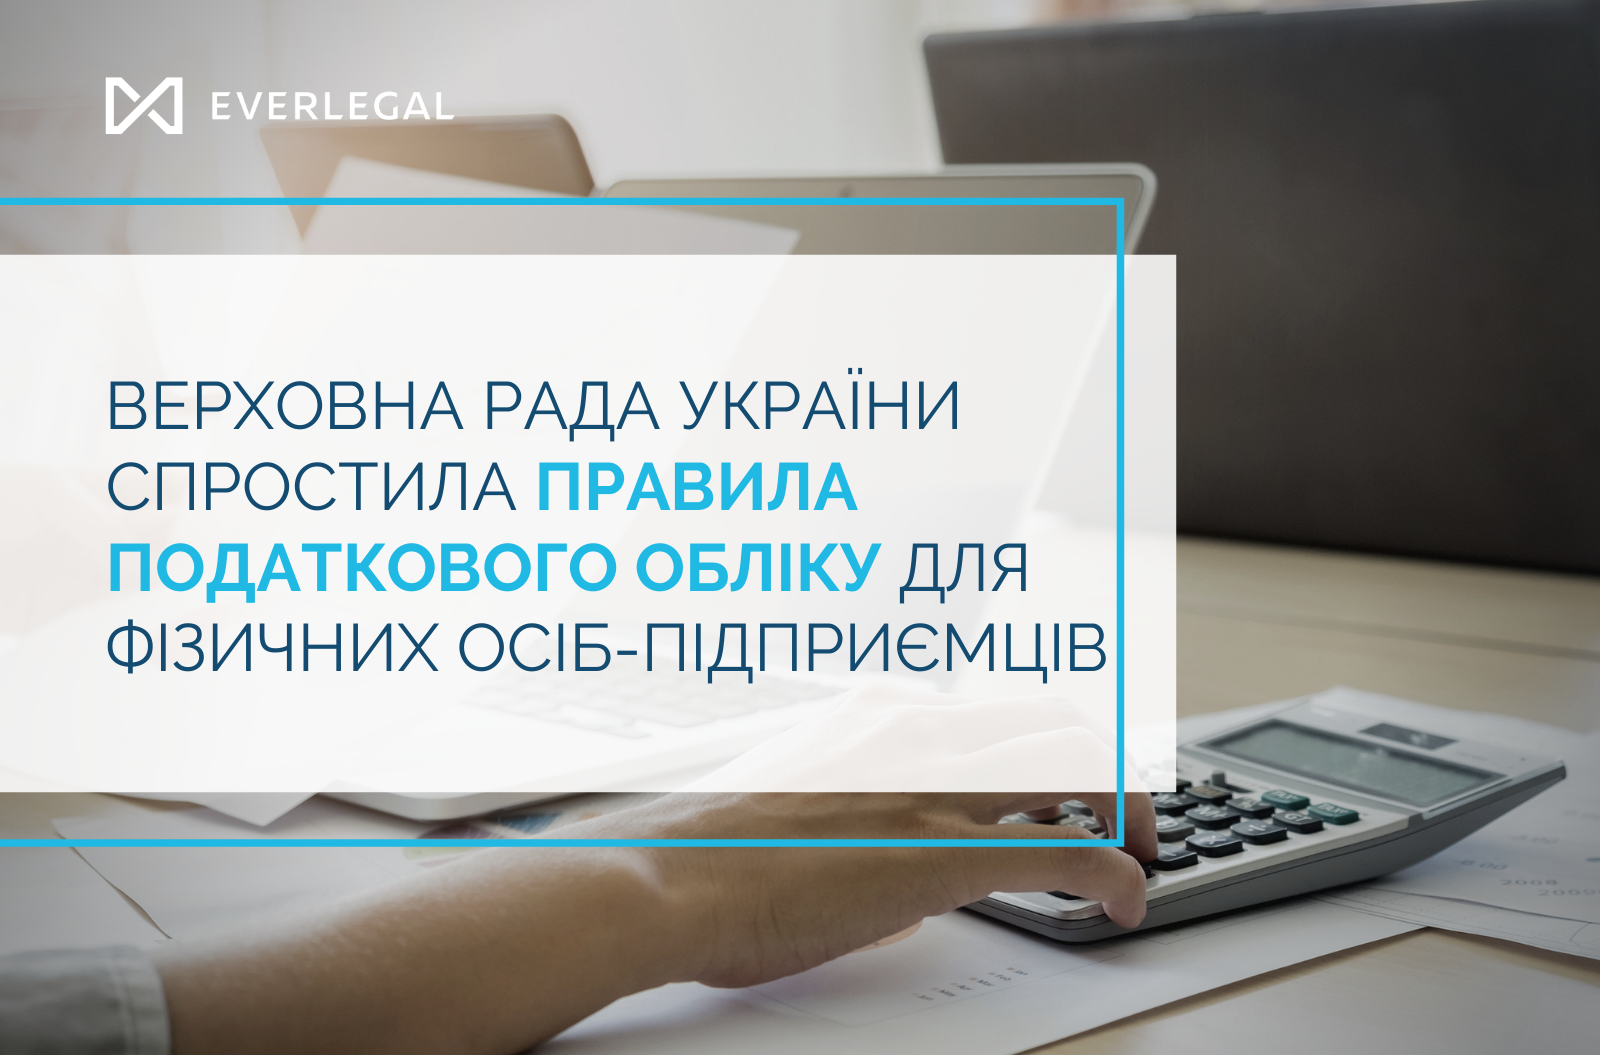 The Verkhovna Rada of Ukraine simplified the rules of tax accounting for individual entrepreneurs